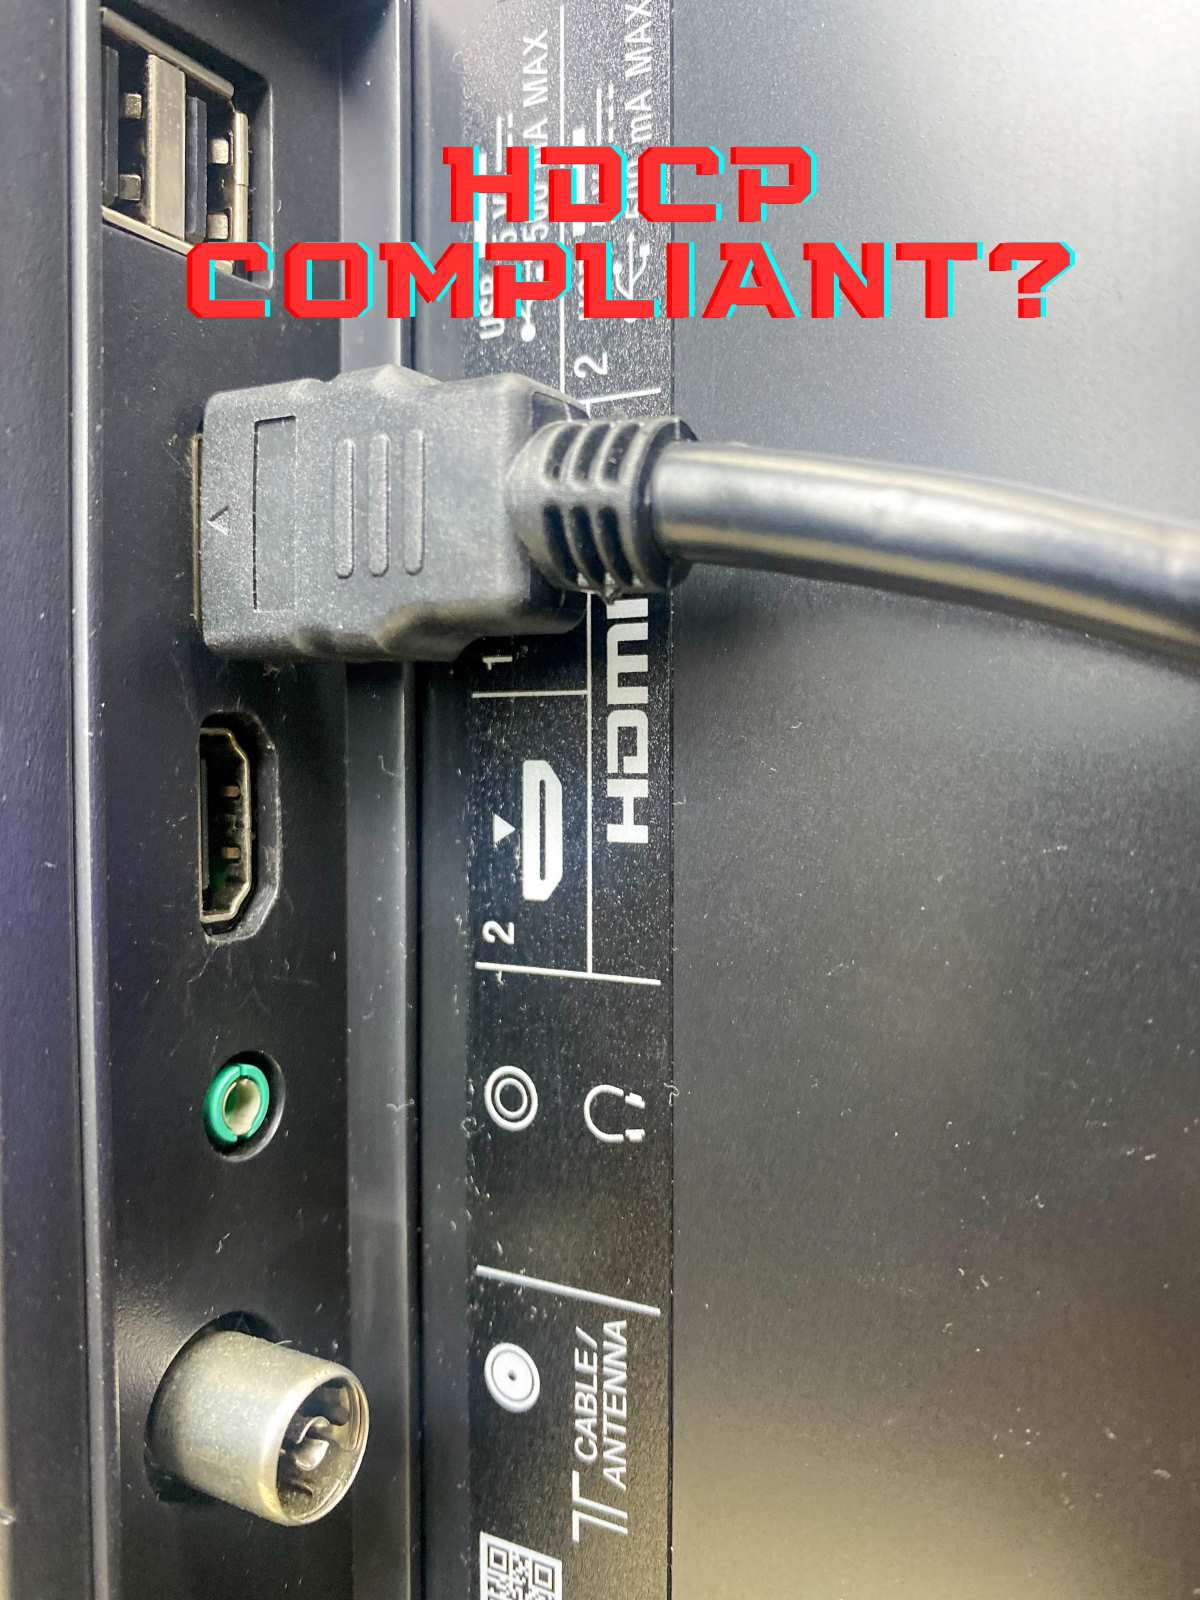 Does an HDMI cable need to be HDCP-compliant